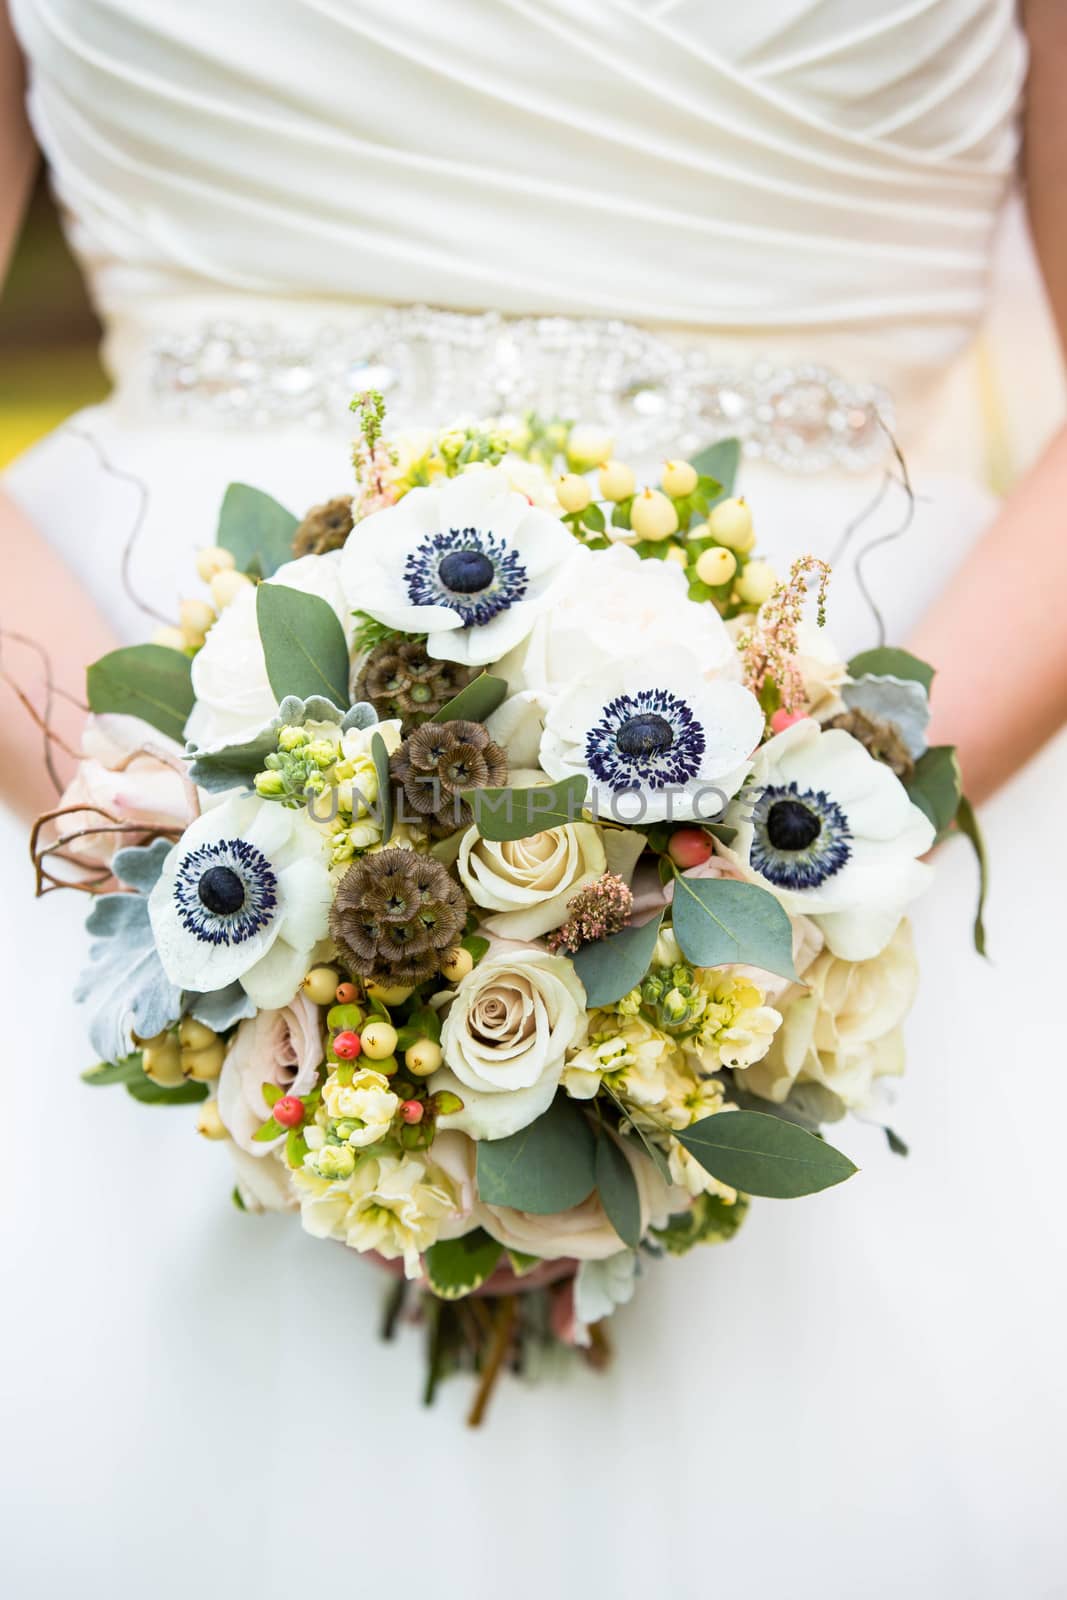 A close up shot highlighting the details of her beautiful wedding bouquet.